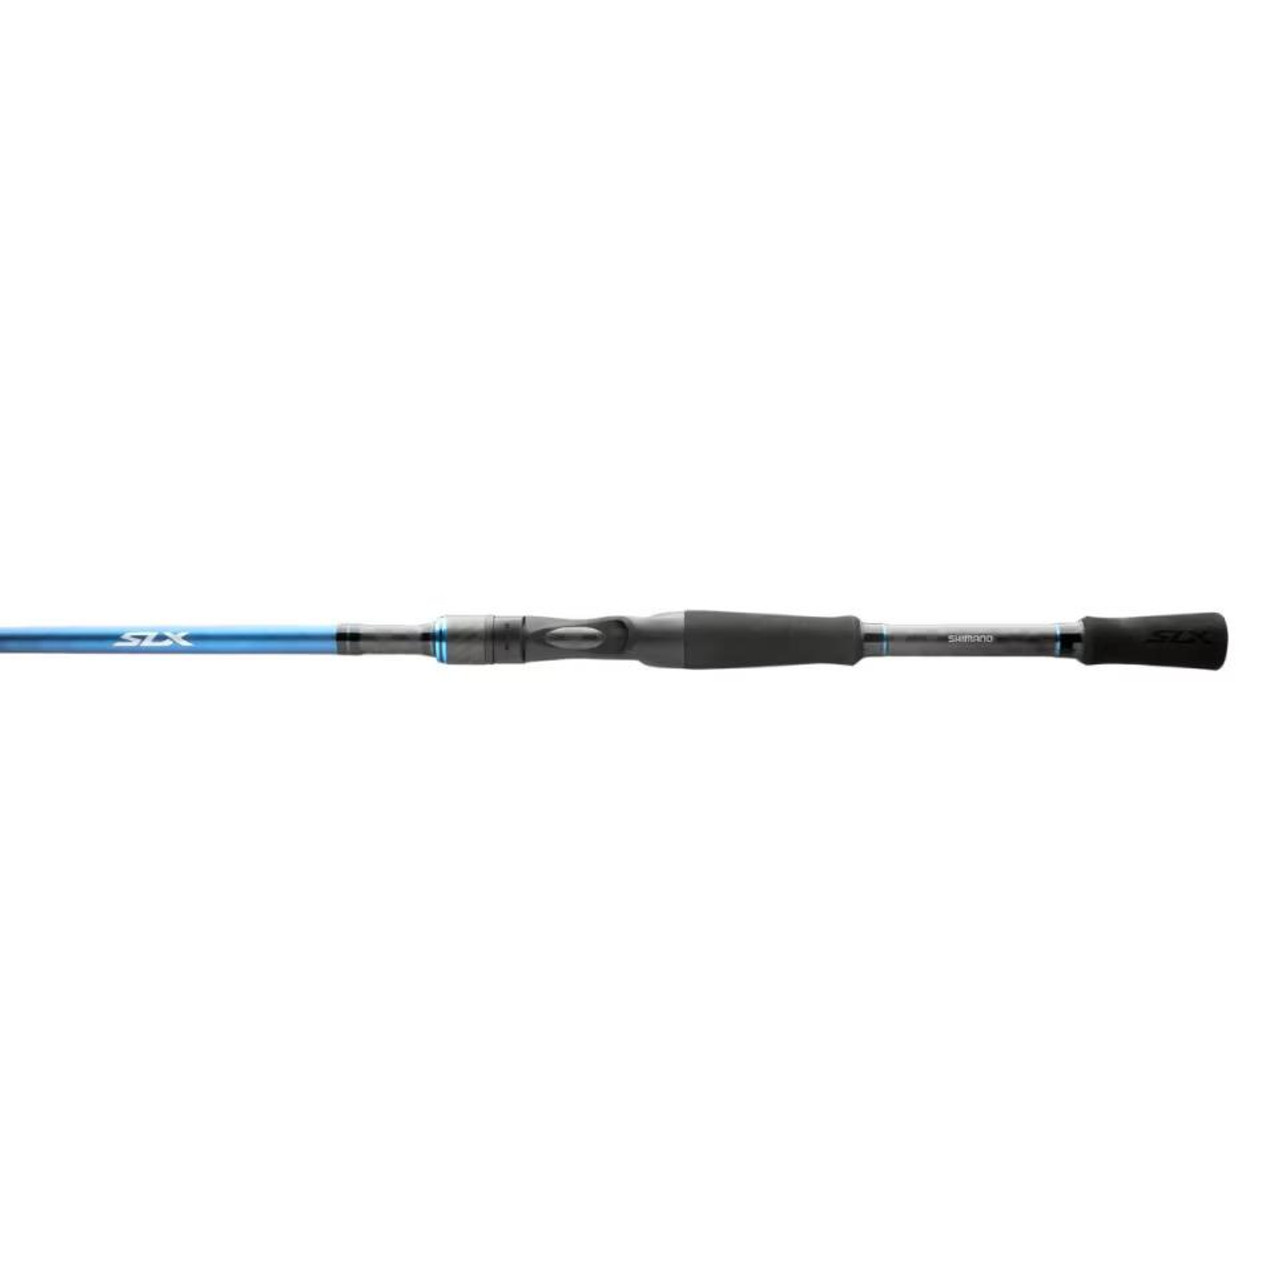 https://cdn11.bigcommerce.com/s-70mih4s/images/stencil/1280x1280/products/22722/61794/Shimano-SLX-A-Baitcaster-Rods-022255131841_image1__17774.1679505665.jpg?c=2